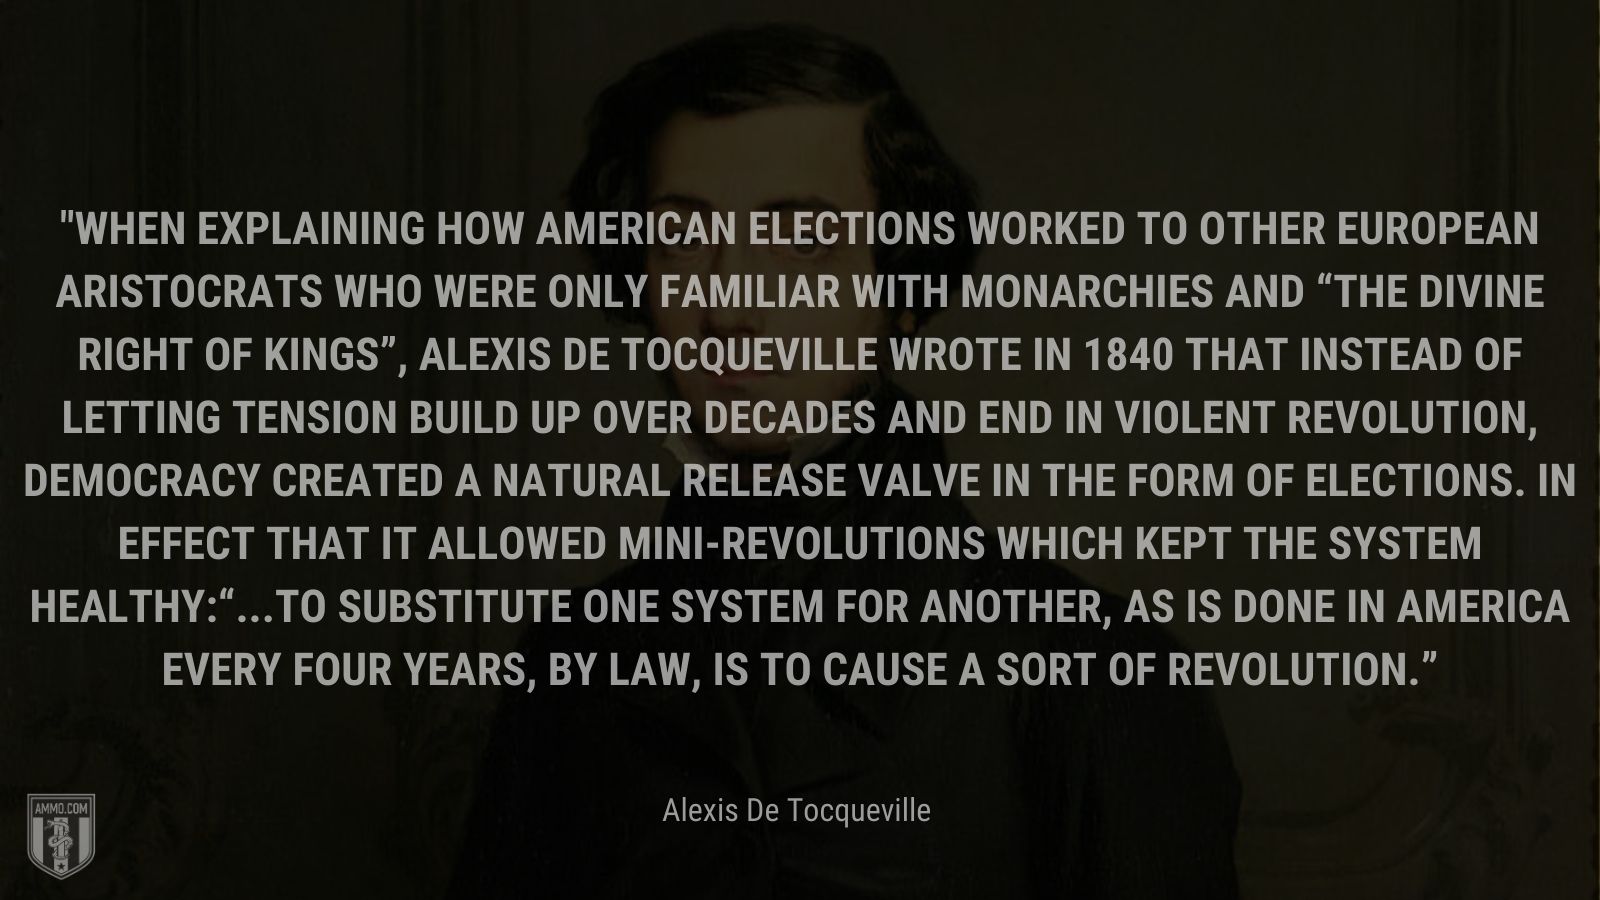 “When explaining how American elections worked to other European aristocrats who were only familiar with monarchies and “the divine right of kings”, Alexis de Tocqueville wrote in 1840 that instead of letting tension build up over decades and end in violent revolution, democracy created a natural release valve in the form of elections. In effect that it allowed mini-revolutions which kept the system healthy:“...to substitute one system for another, as is done in America every four years, by law, is to cause a sort of revolution.” - Alexis De Tocqueville